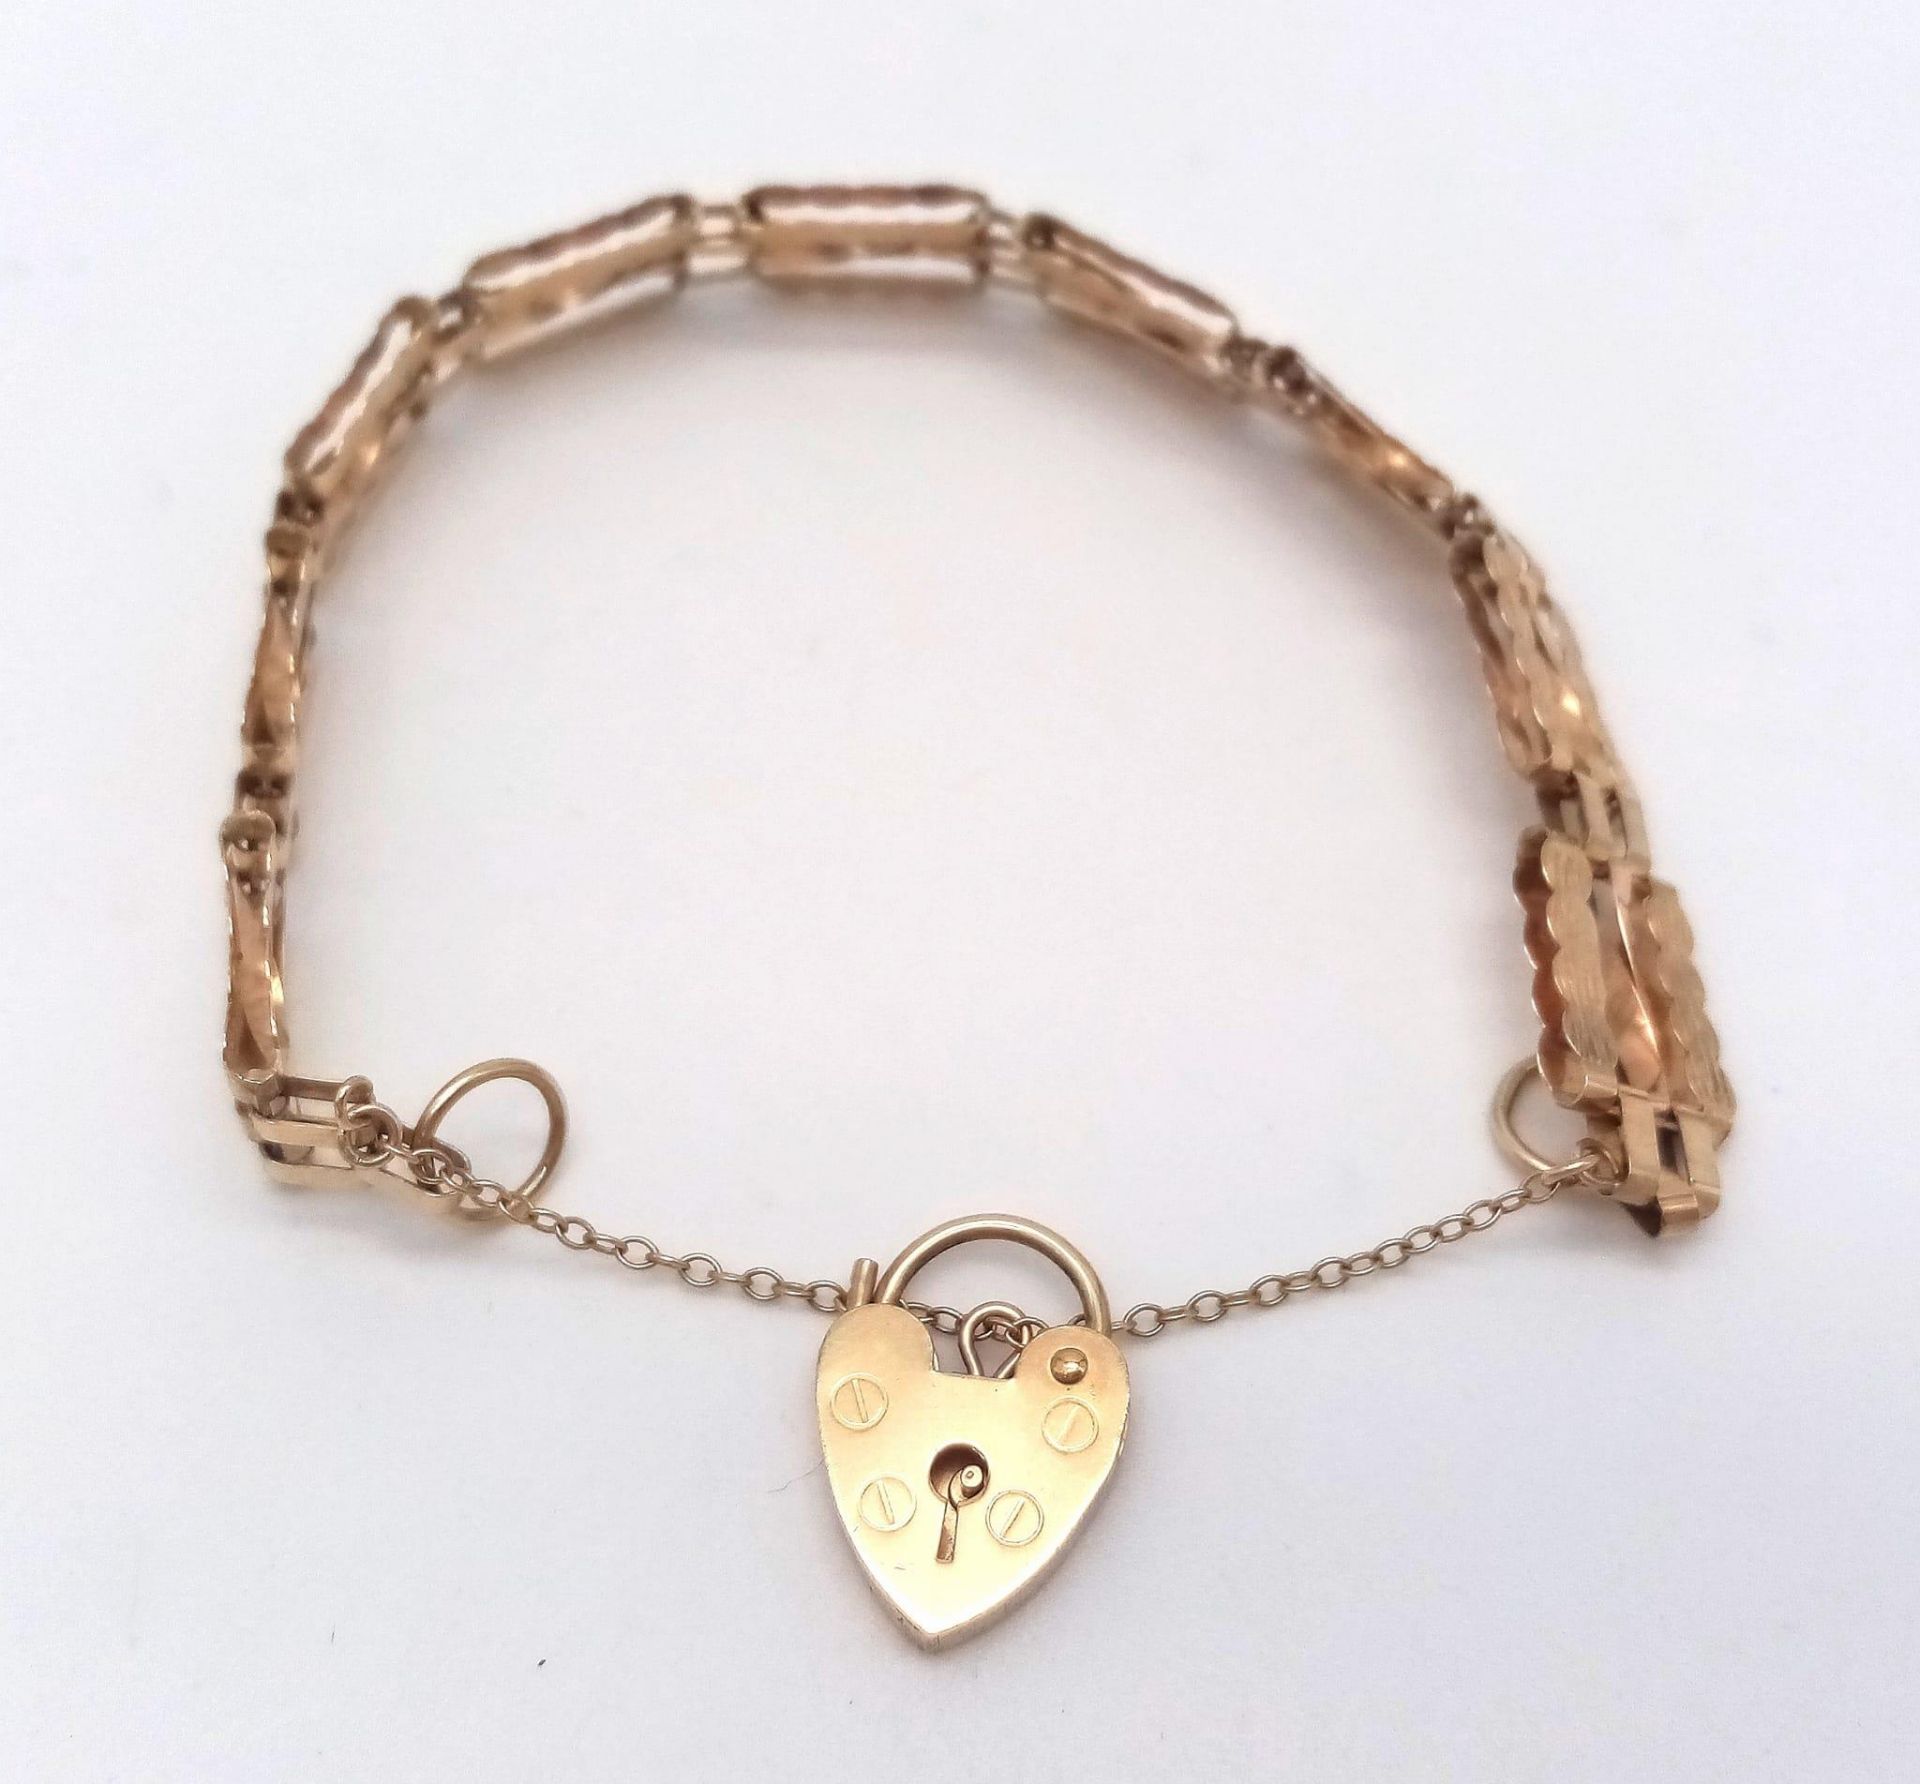 AN ANTIQUE 9K GOLD NICELY PATTERNED GATE BRACELET WITH HEART PADLOCK AND SAFETY CHAIN . 8.1gms - Bild 5 aus 9